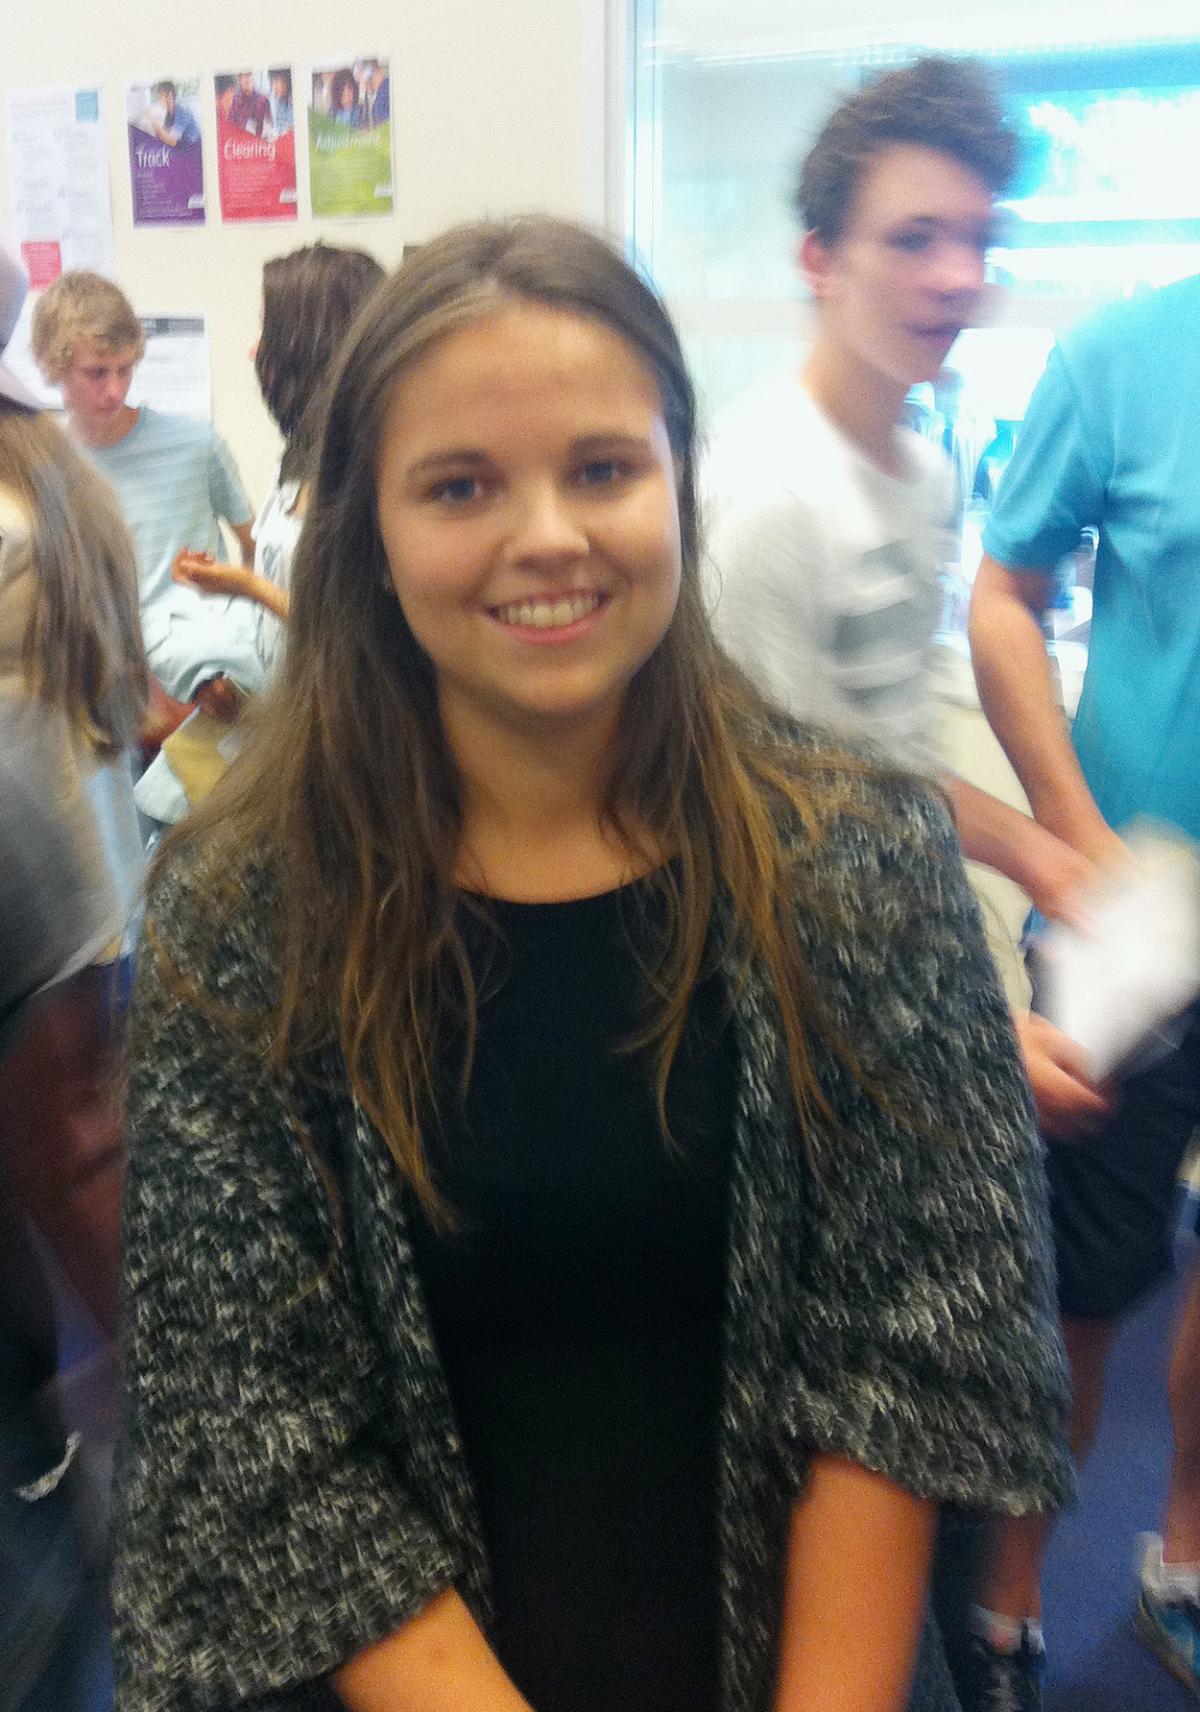 A Level results day 2015 at St Edward's School 